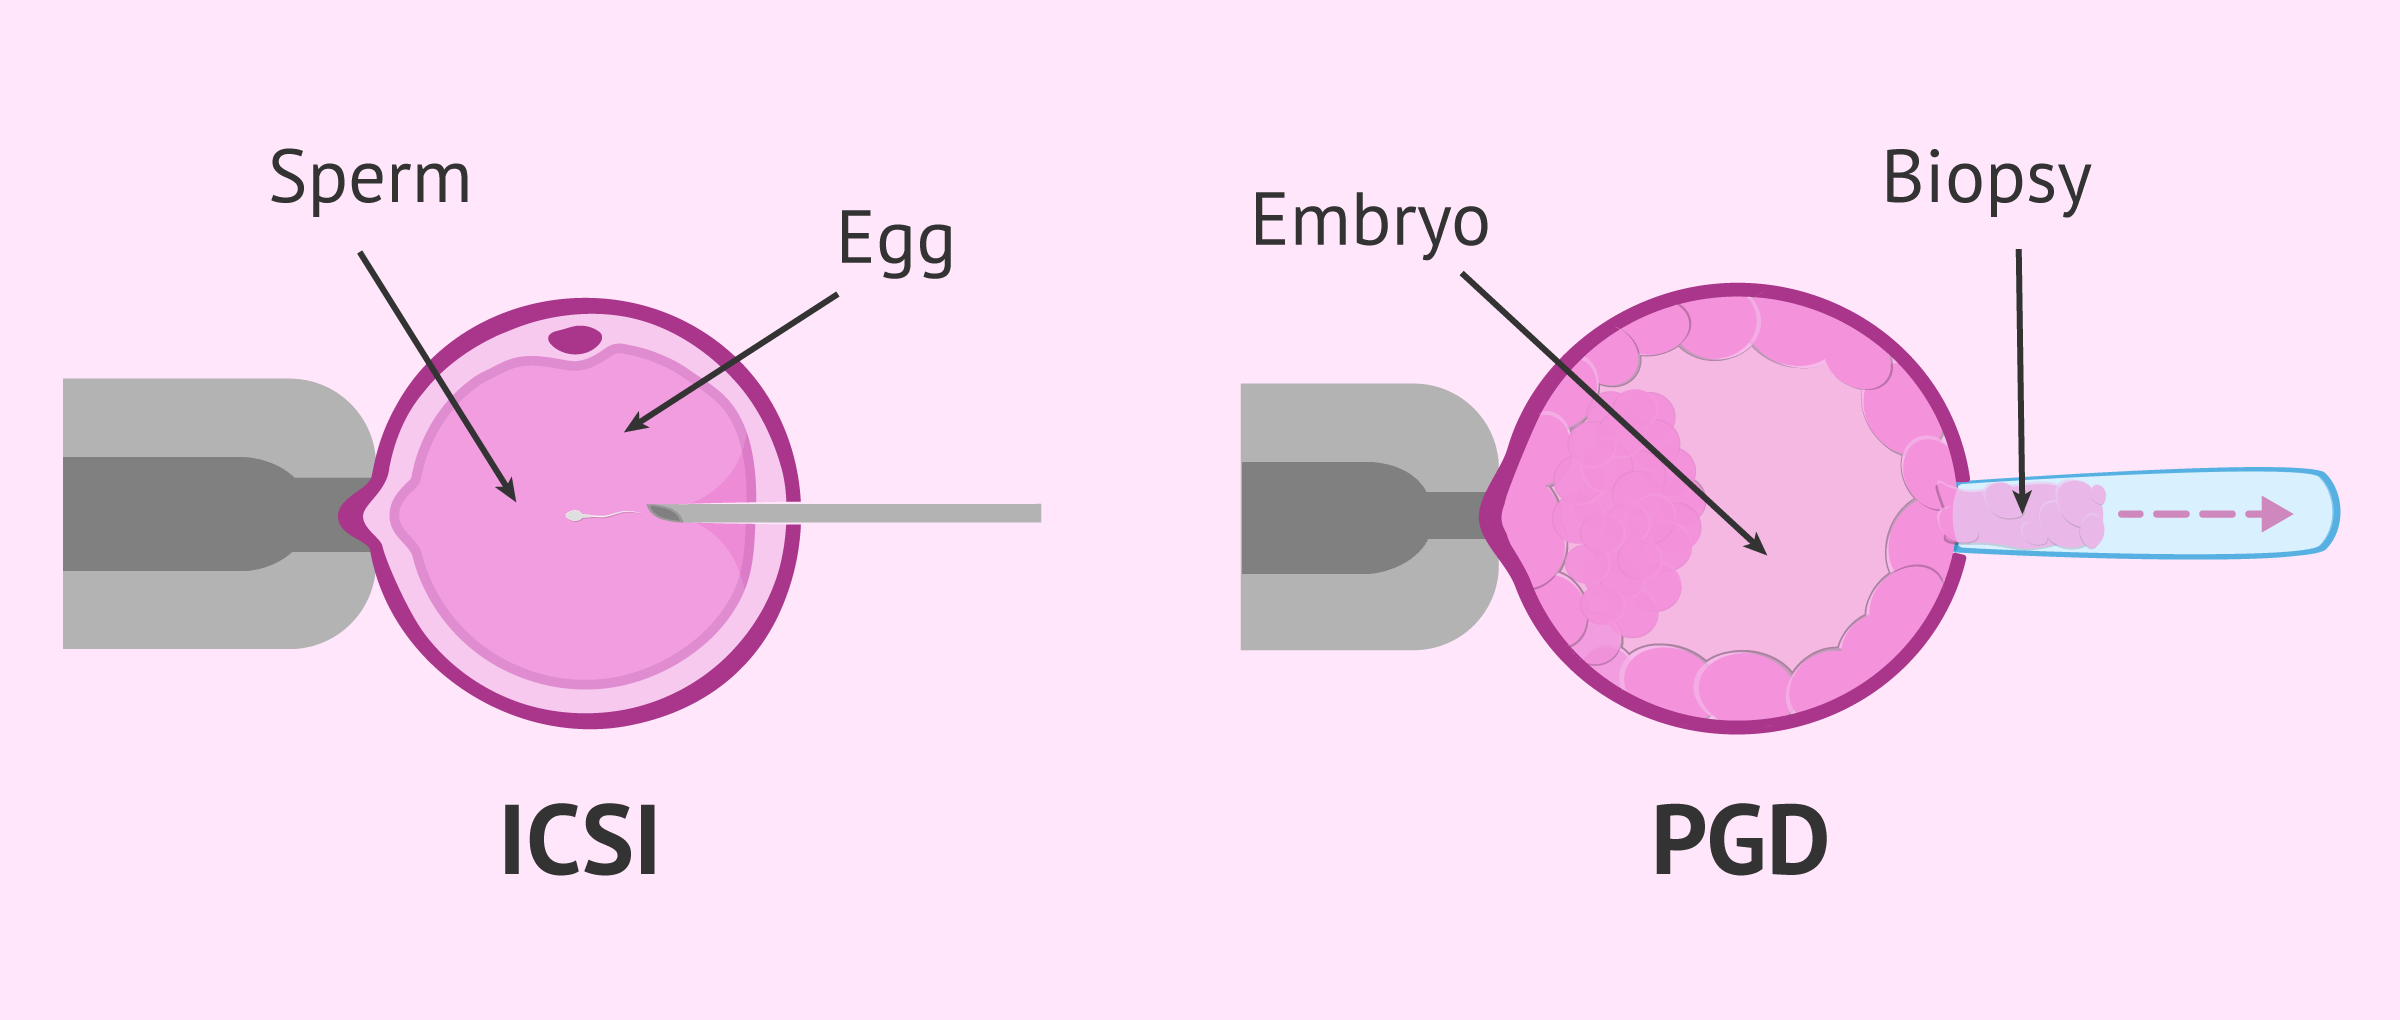 Complementary techniques in IVF